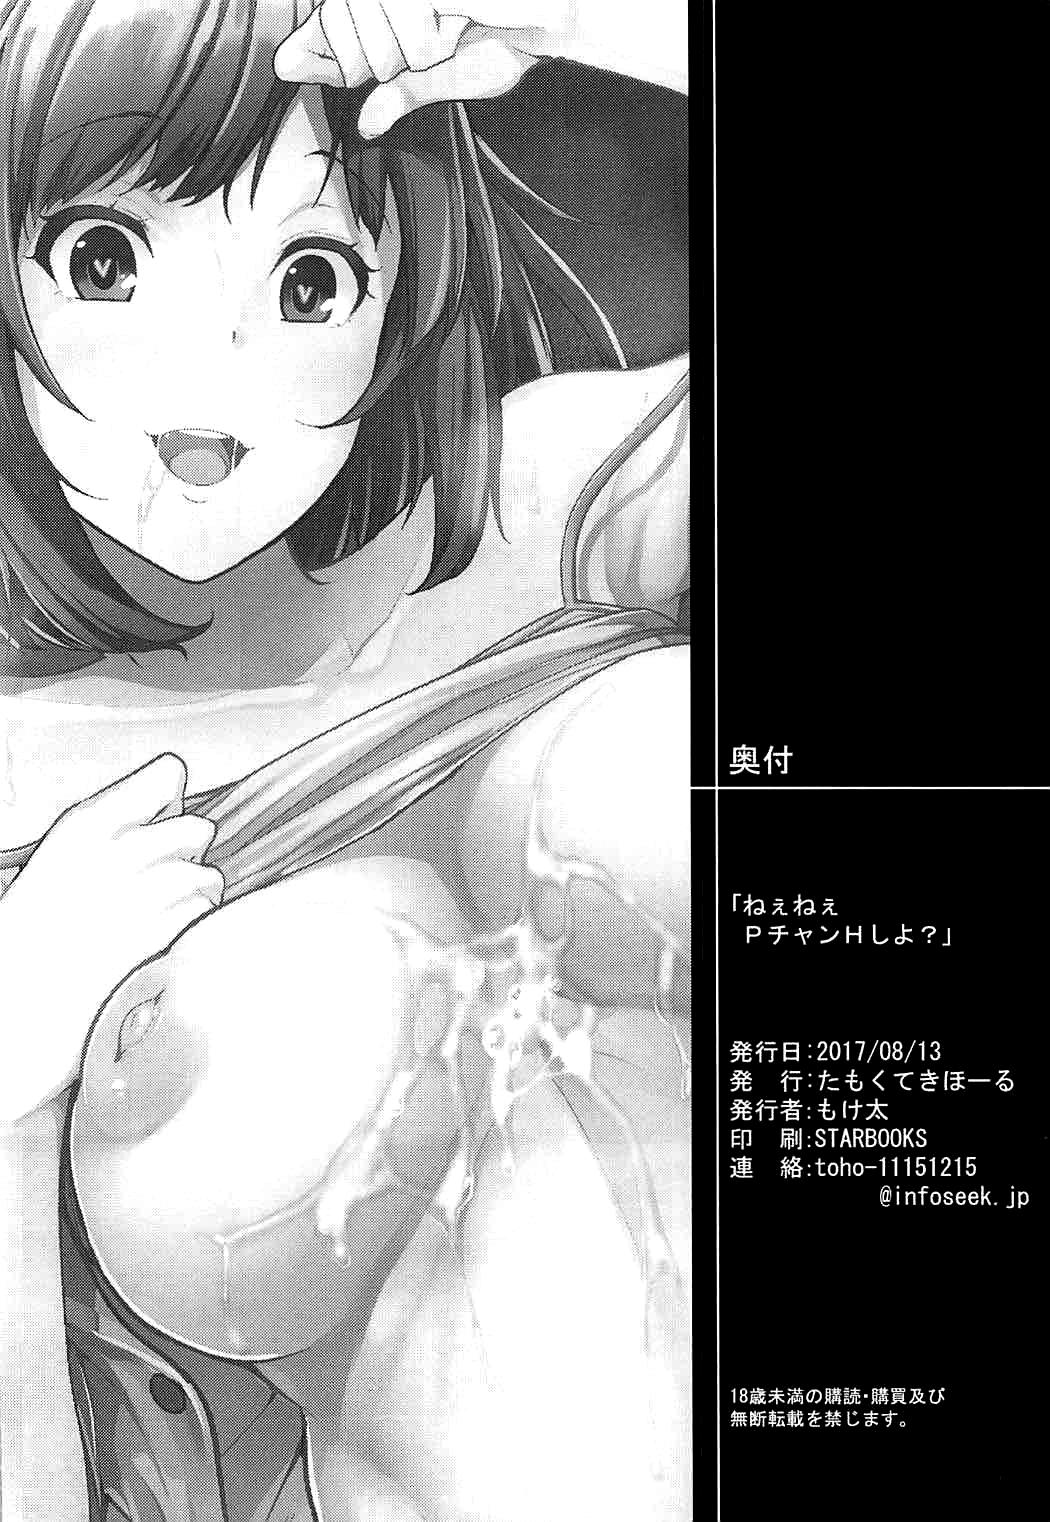 Amateur Porn Nee Nee P-chan H Shiyo? - The idolmaster Missionary Position Porn - Page 25